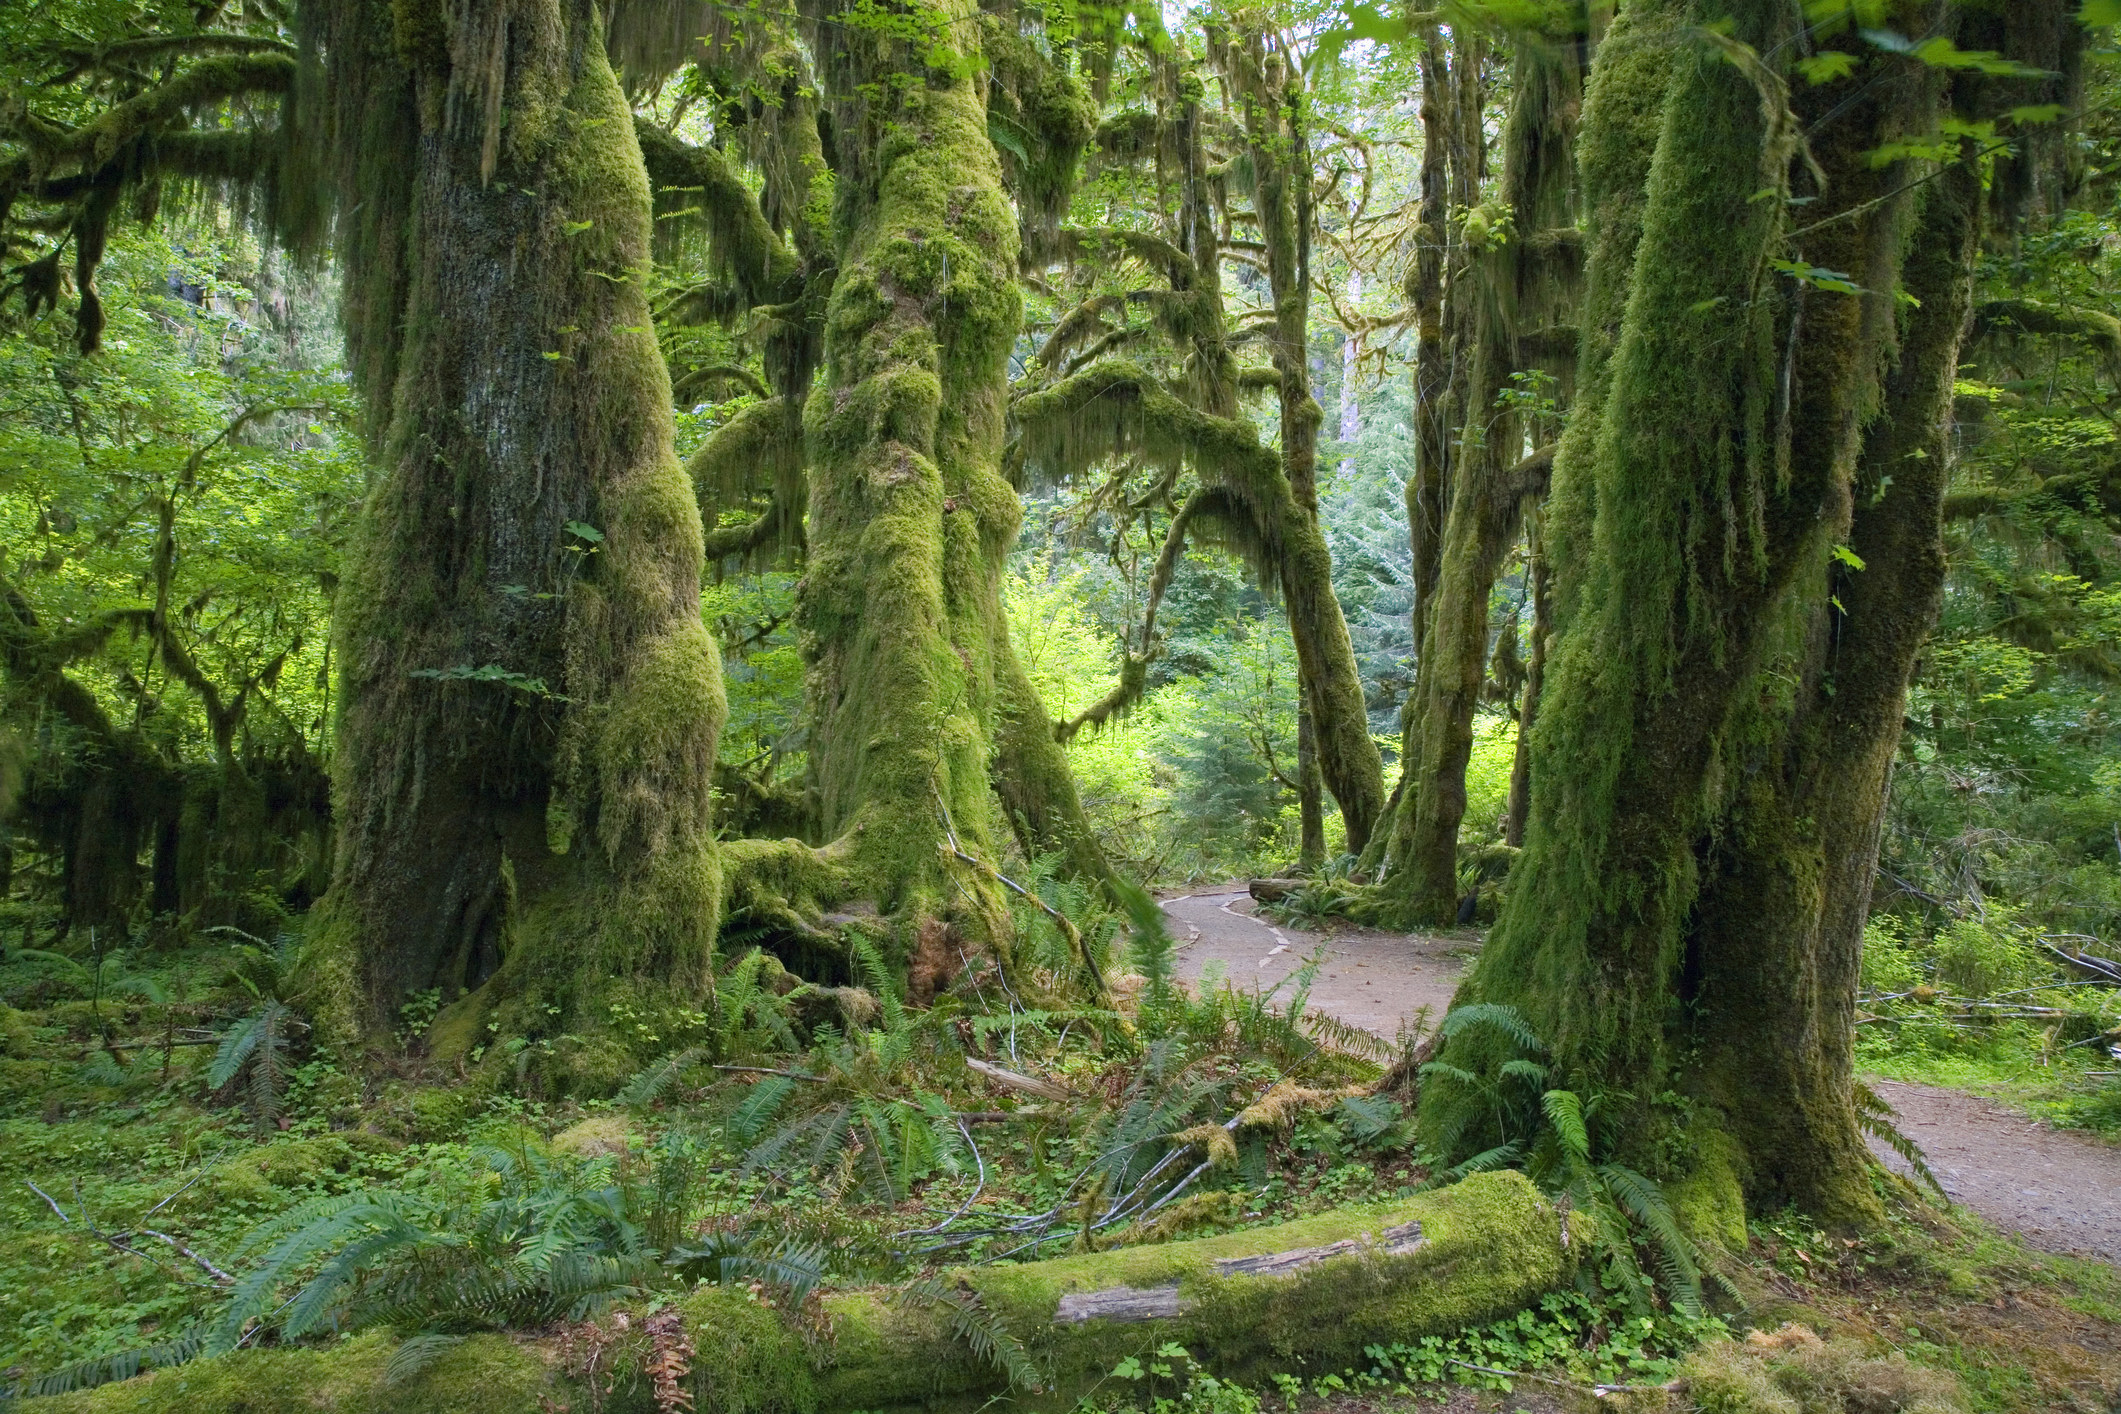 Hoh rainforest in Olympic National Park.